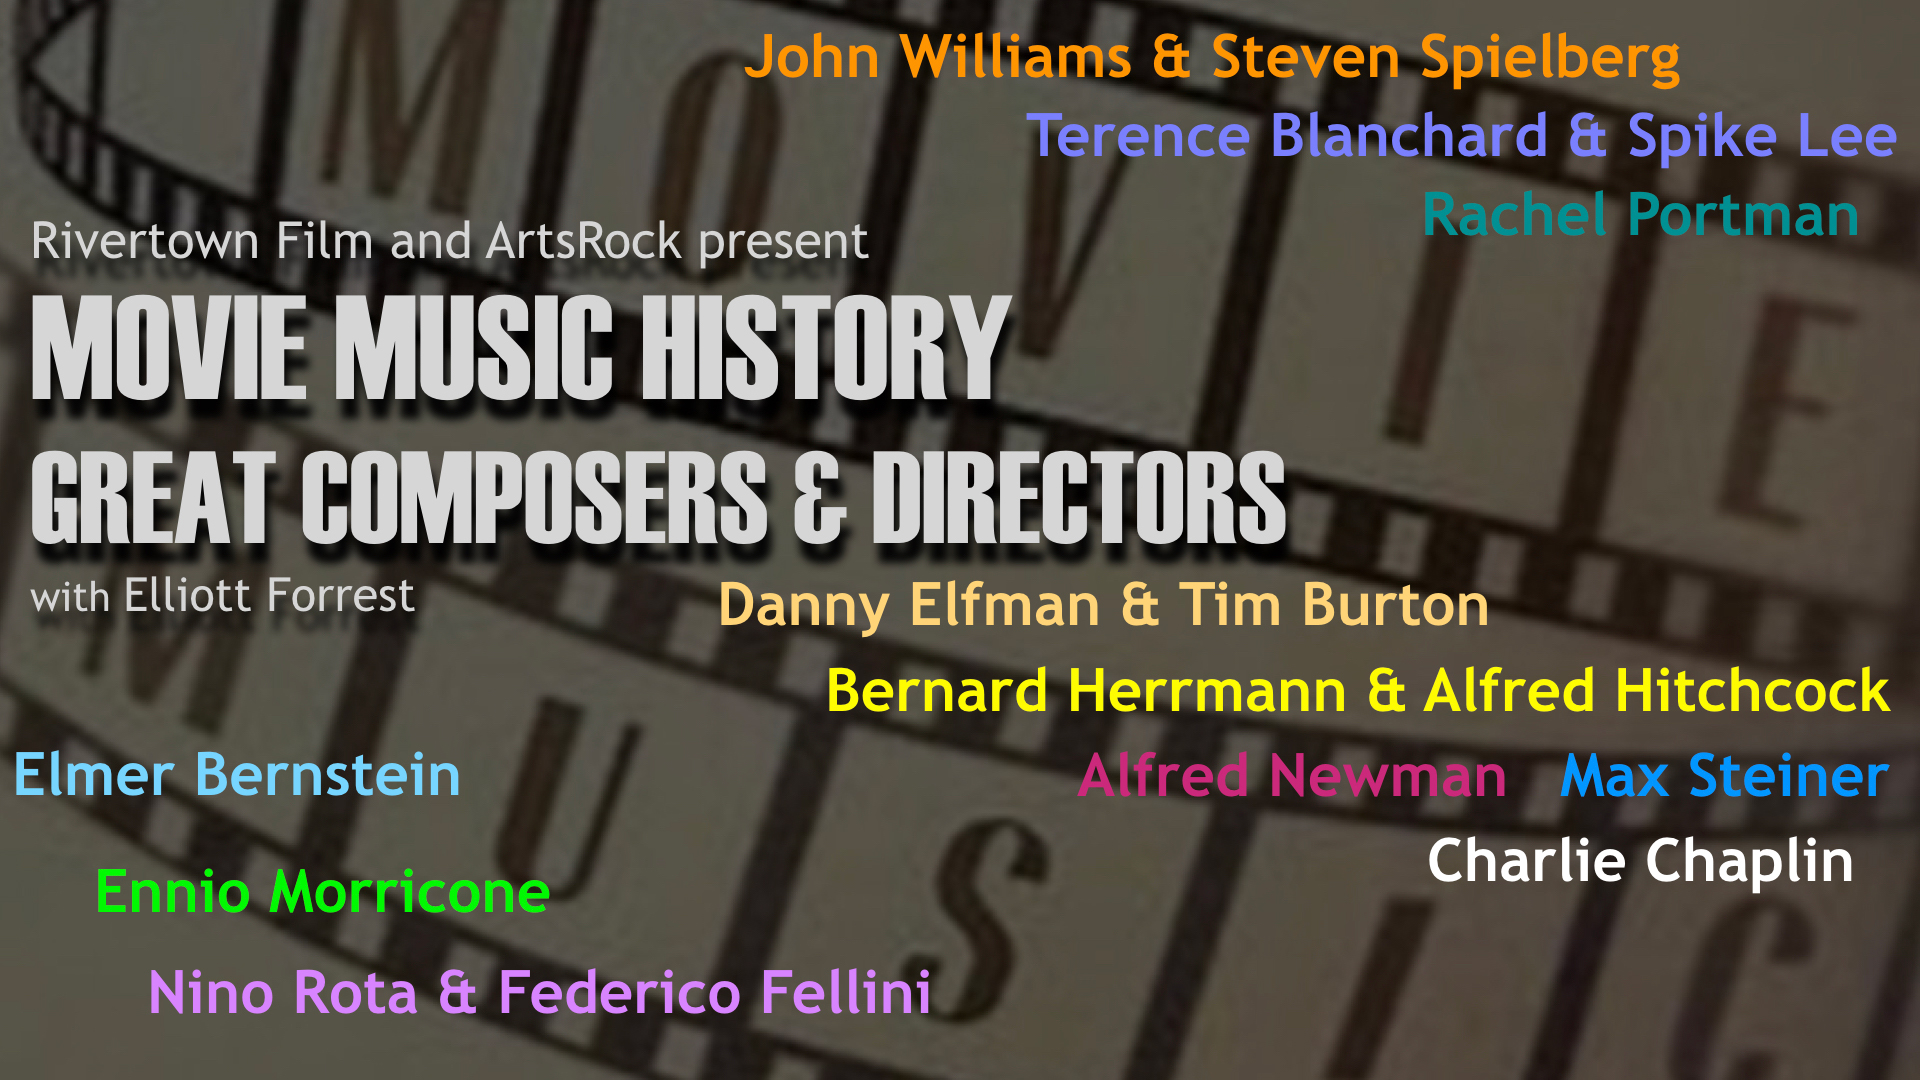 Movie Music History, Great Composer and Directors with Elliott Forrest